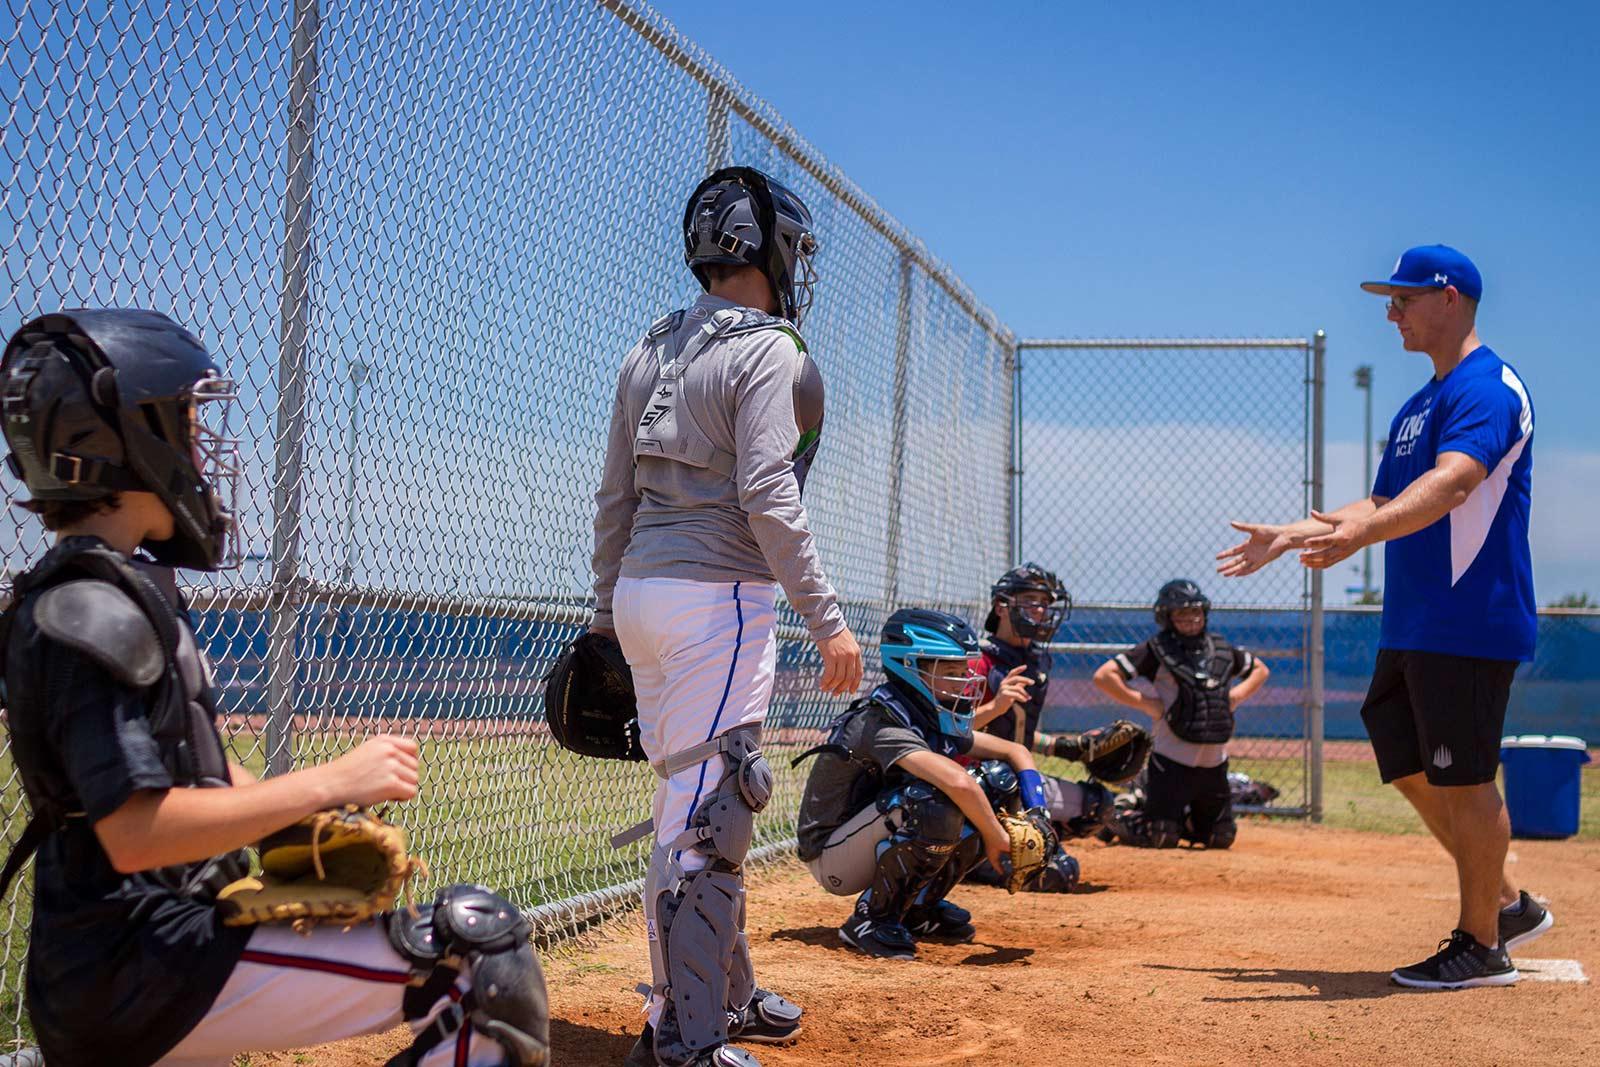 How Playing Sports Prepares Kids for the “Real World”